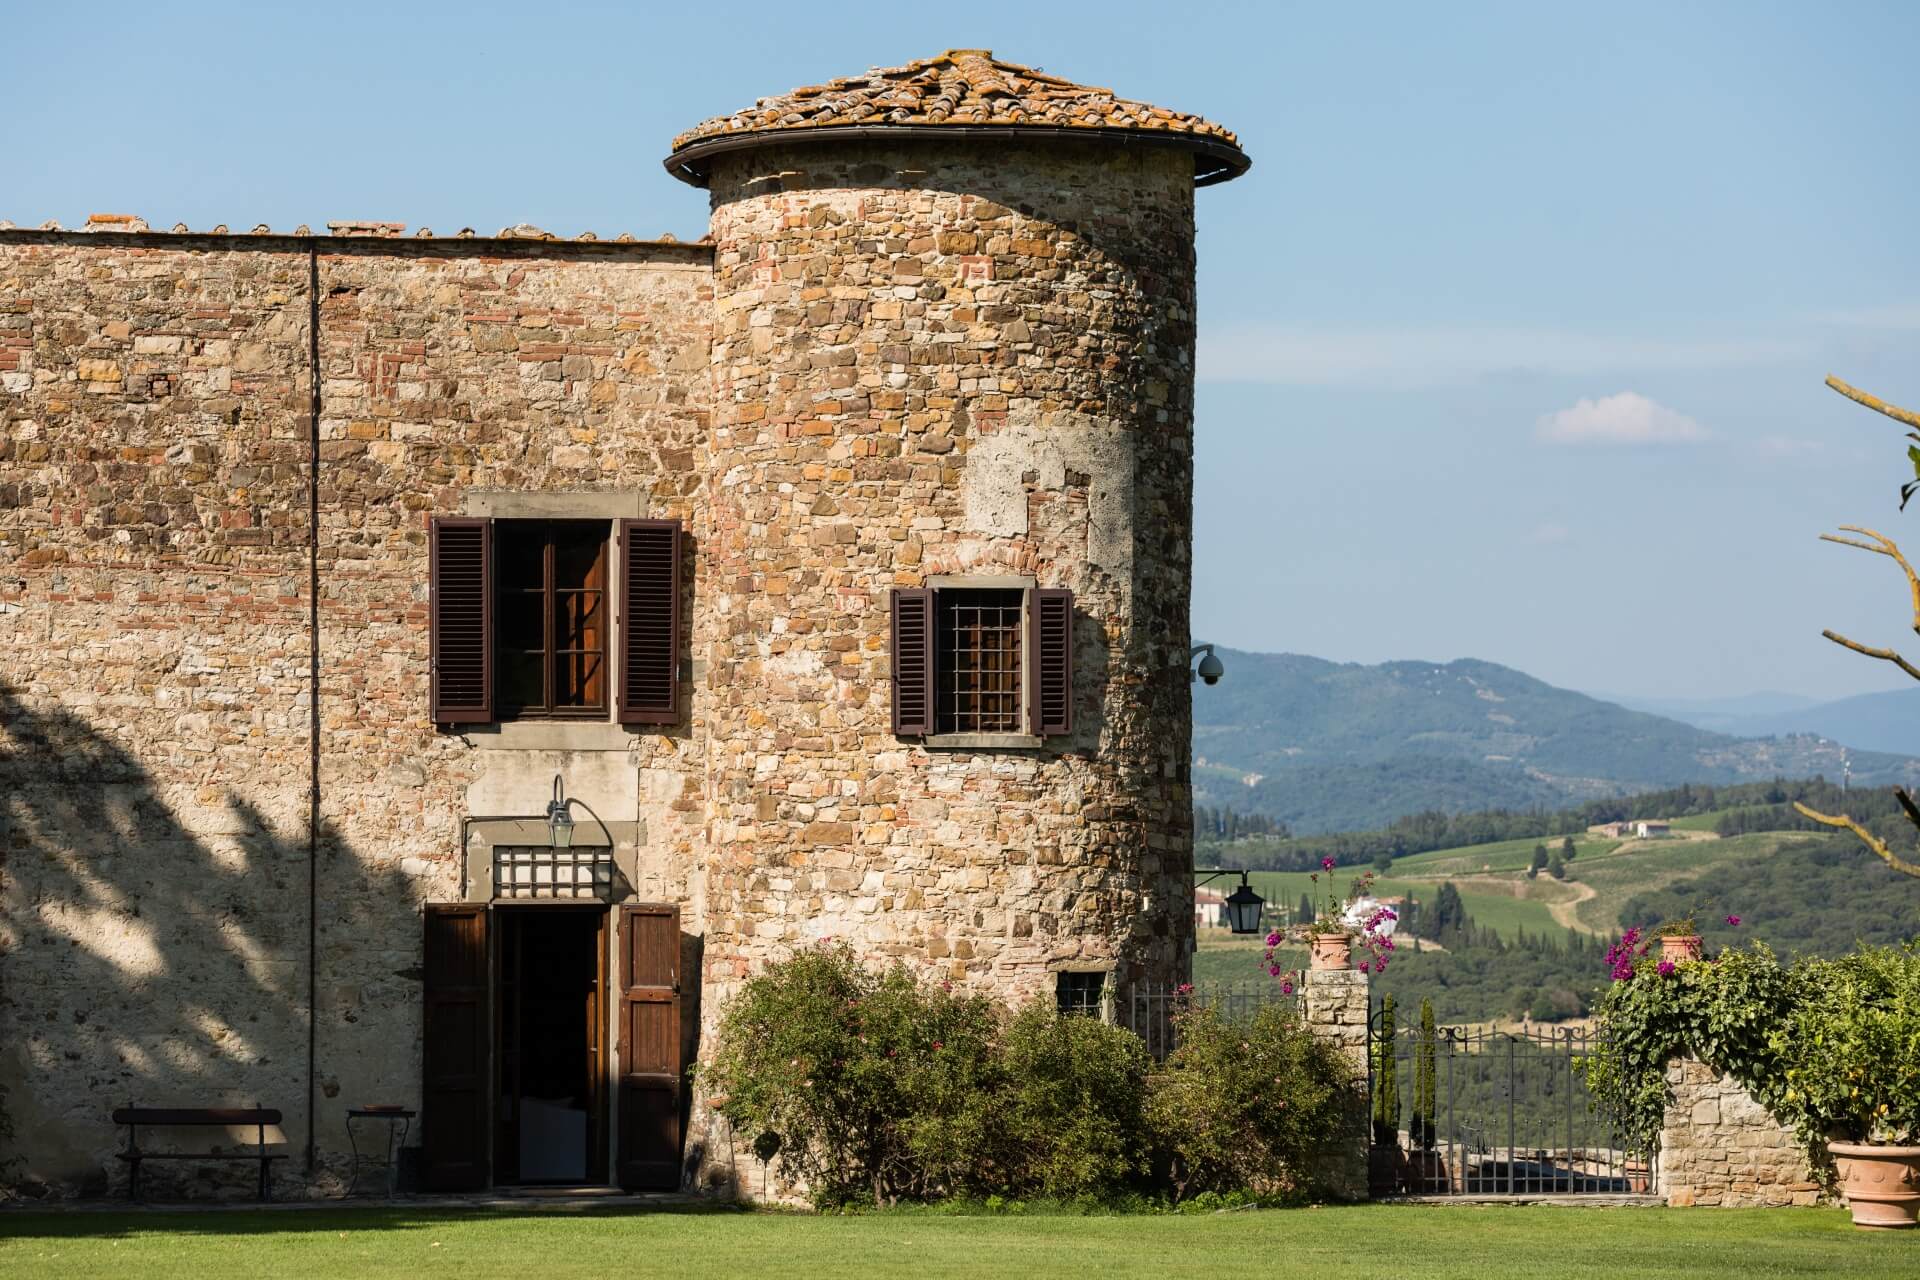 Getting married in a Castle in Tuscany